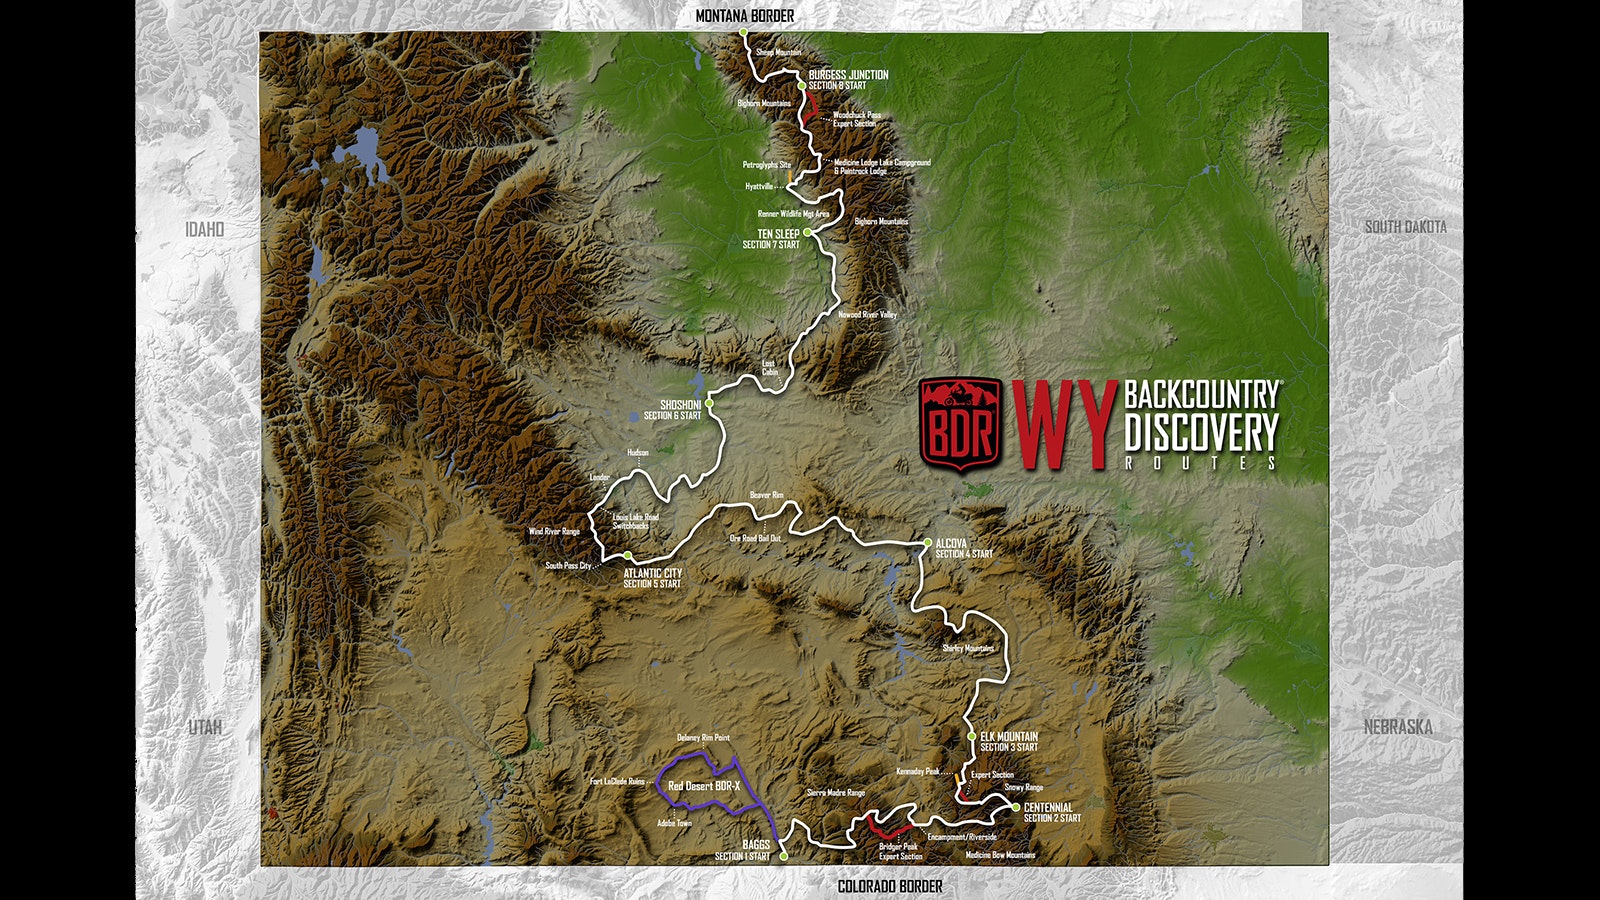 The Wyoming Backcountry Discovery Route is a motorcycle trail crossing the state from north to south. The route was designated in 2022.